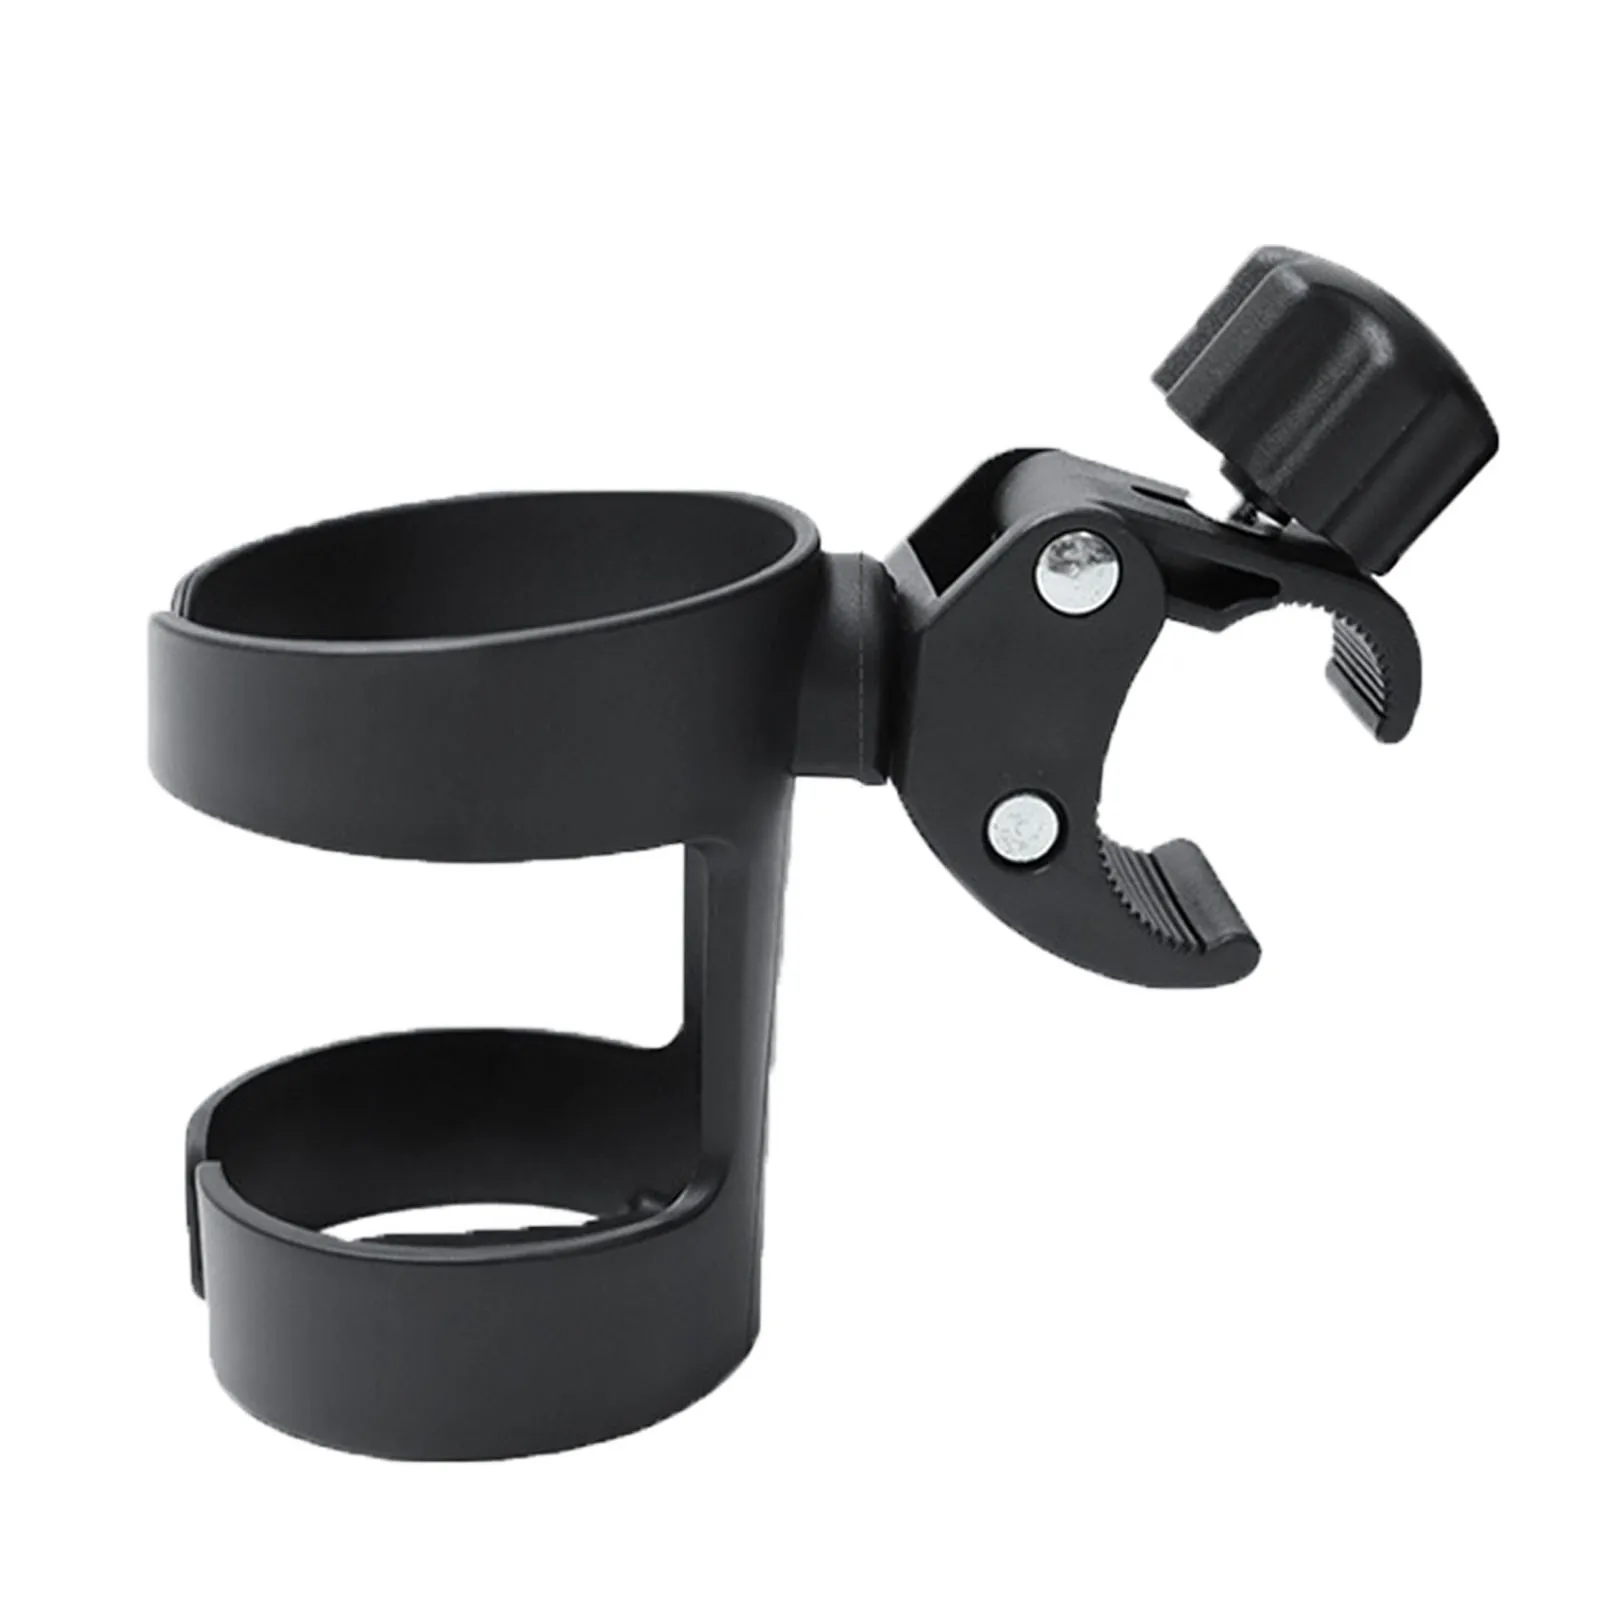 

Universal Cup Holder For Stroller Durable 360 Degrees Rotation Cup Drink Holder For Mom And Babies Fits Most Cup Mug Or Water